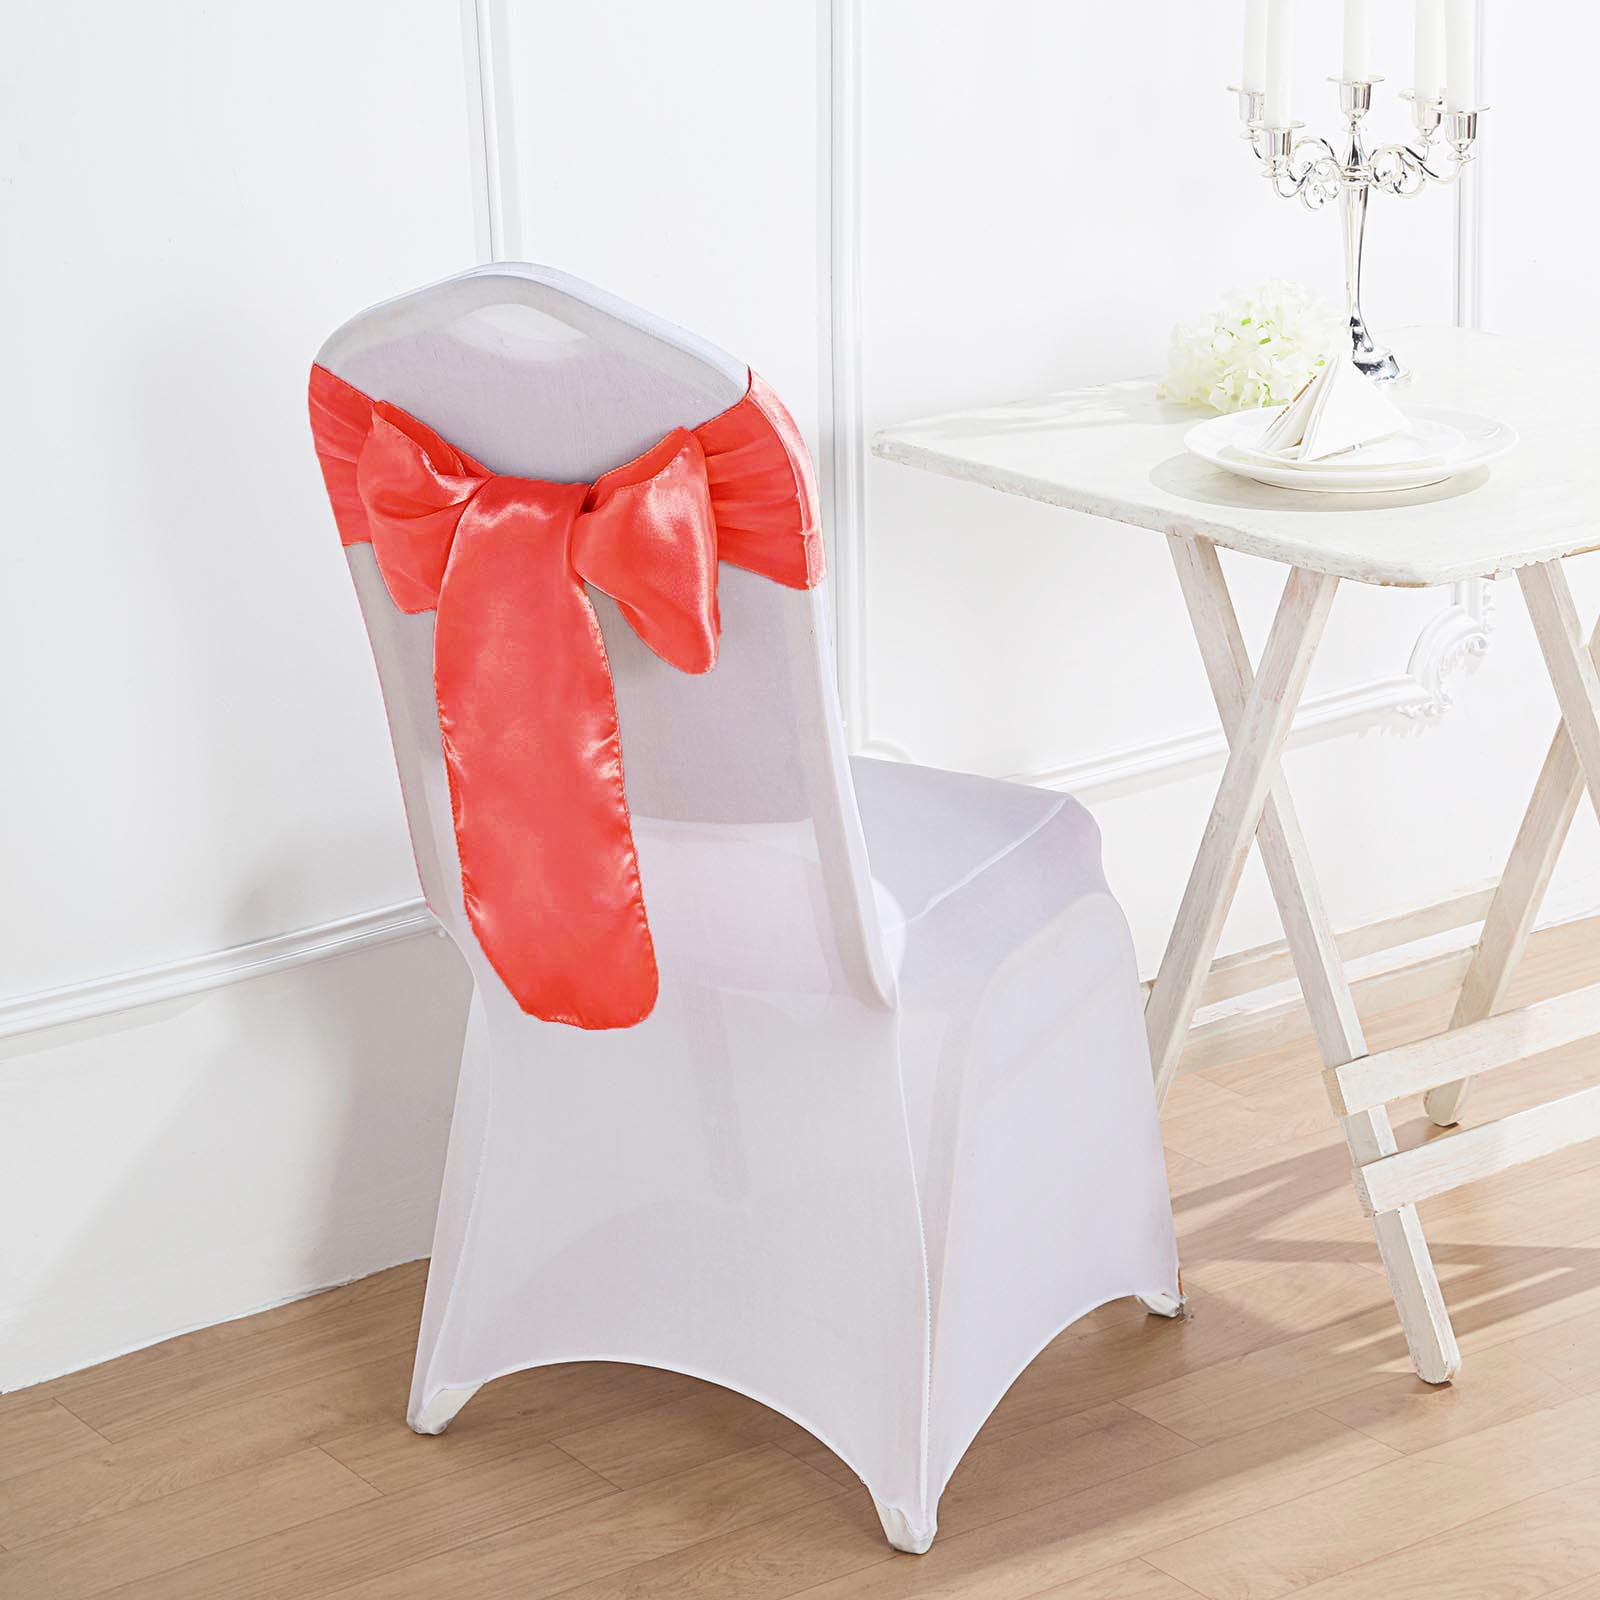 25 Polyester Banquet Chair Covers Wedding Reception Party Decorations 3 Colors! 